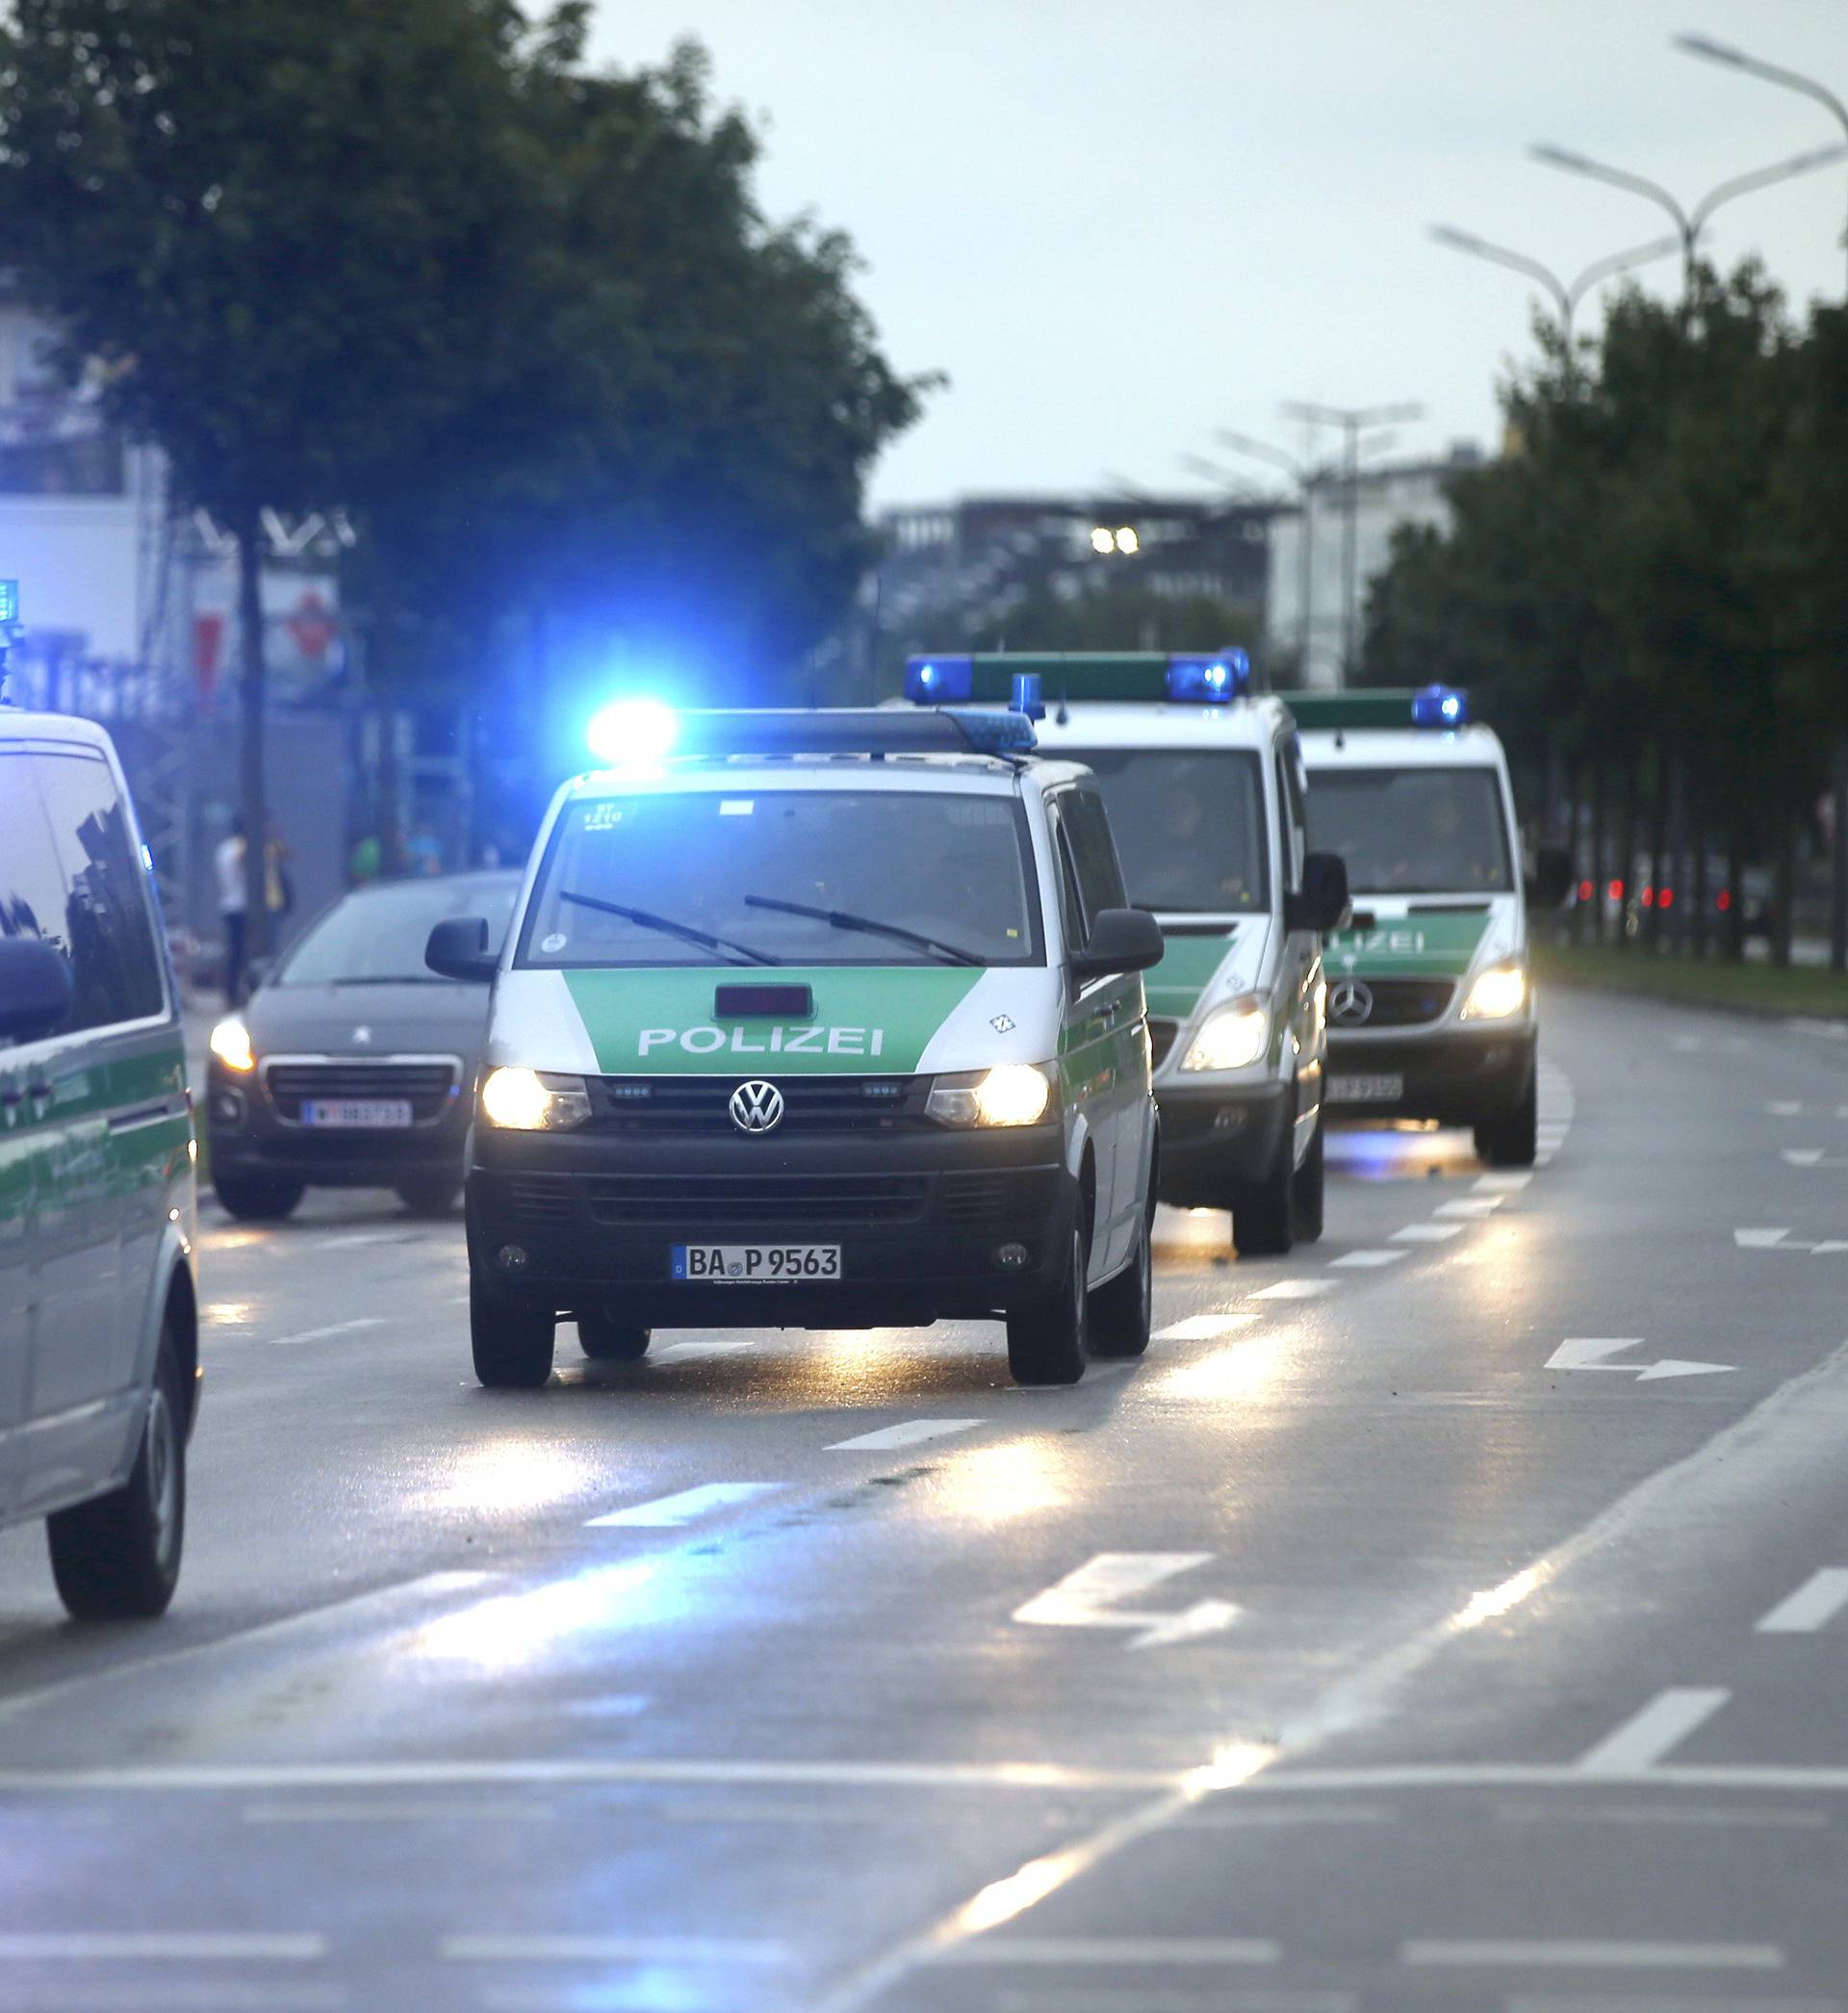 Police make their way to the scene of a shooting rampage at Olympia shopping mall in Munich